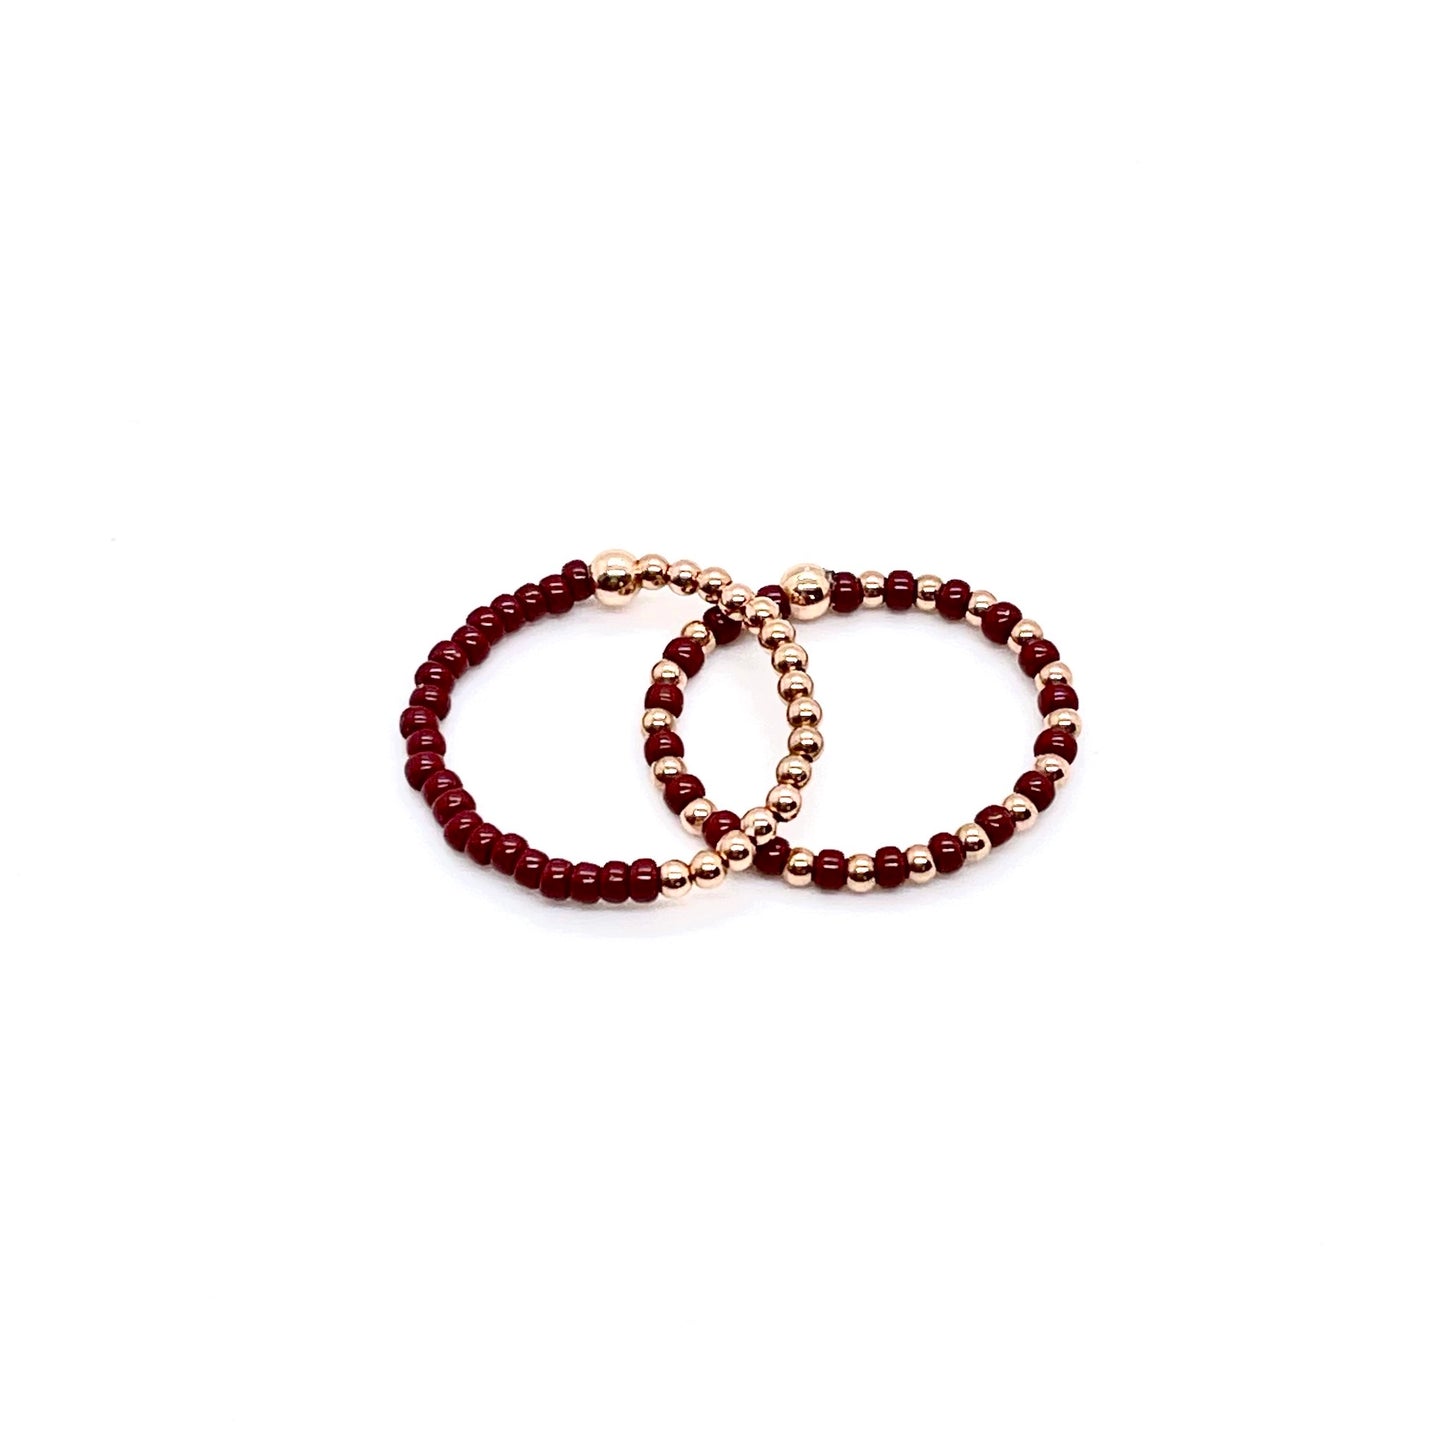 Stretch ring set with brown color block and seed beads alternating with 2mm 14K rose gold filled balls on stretch cord.